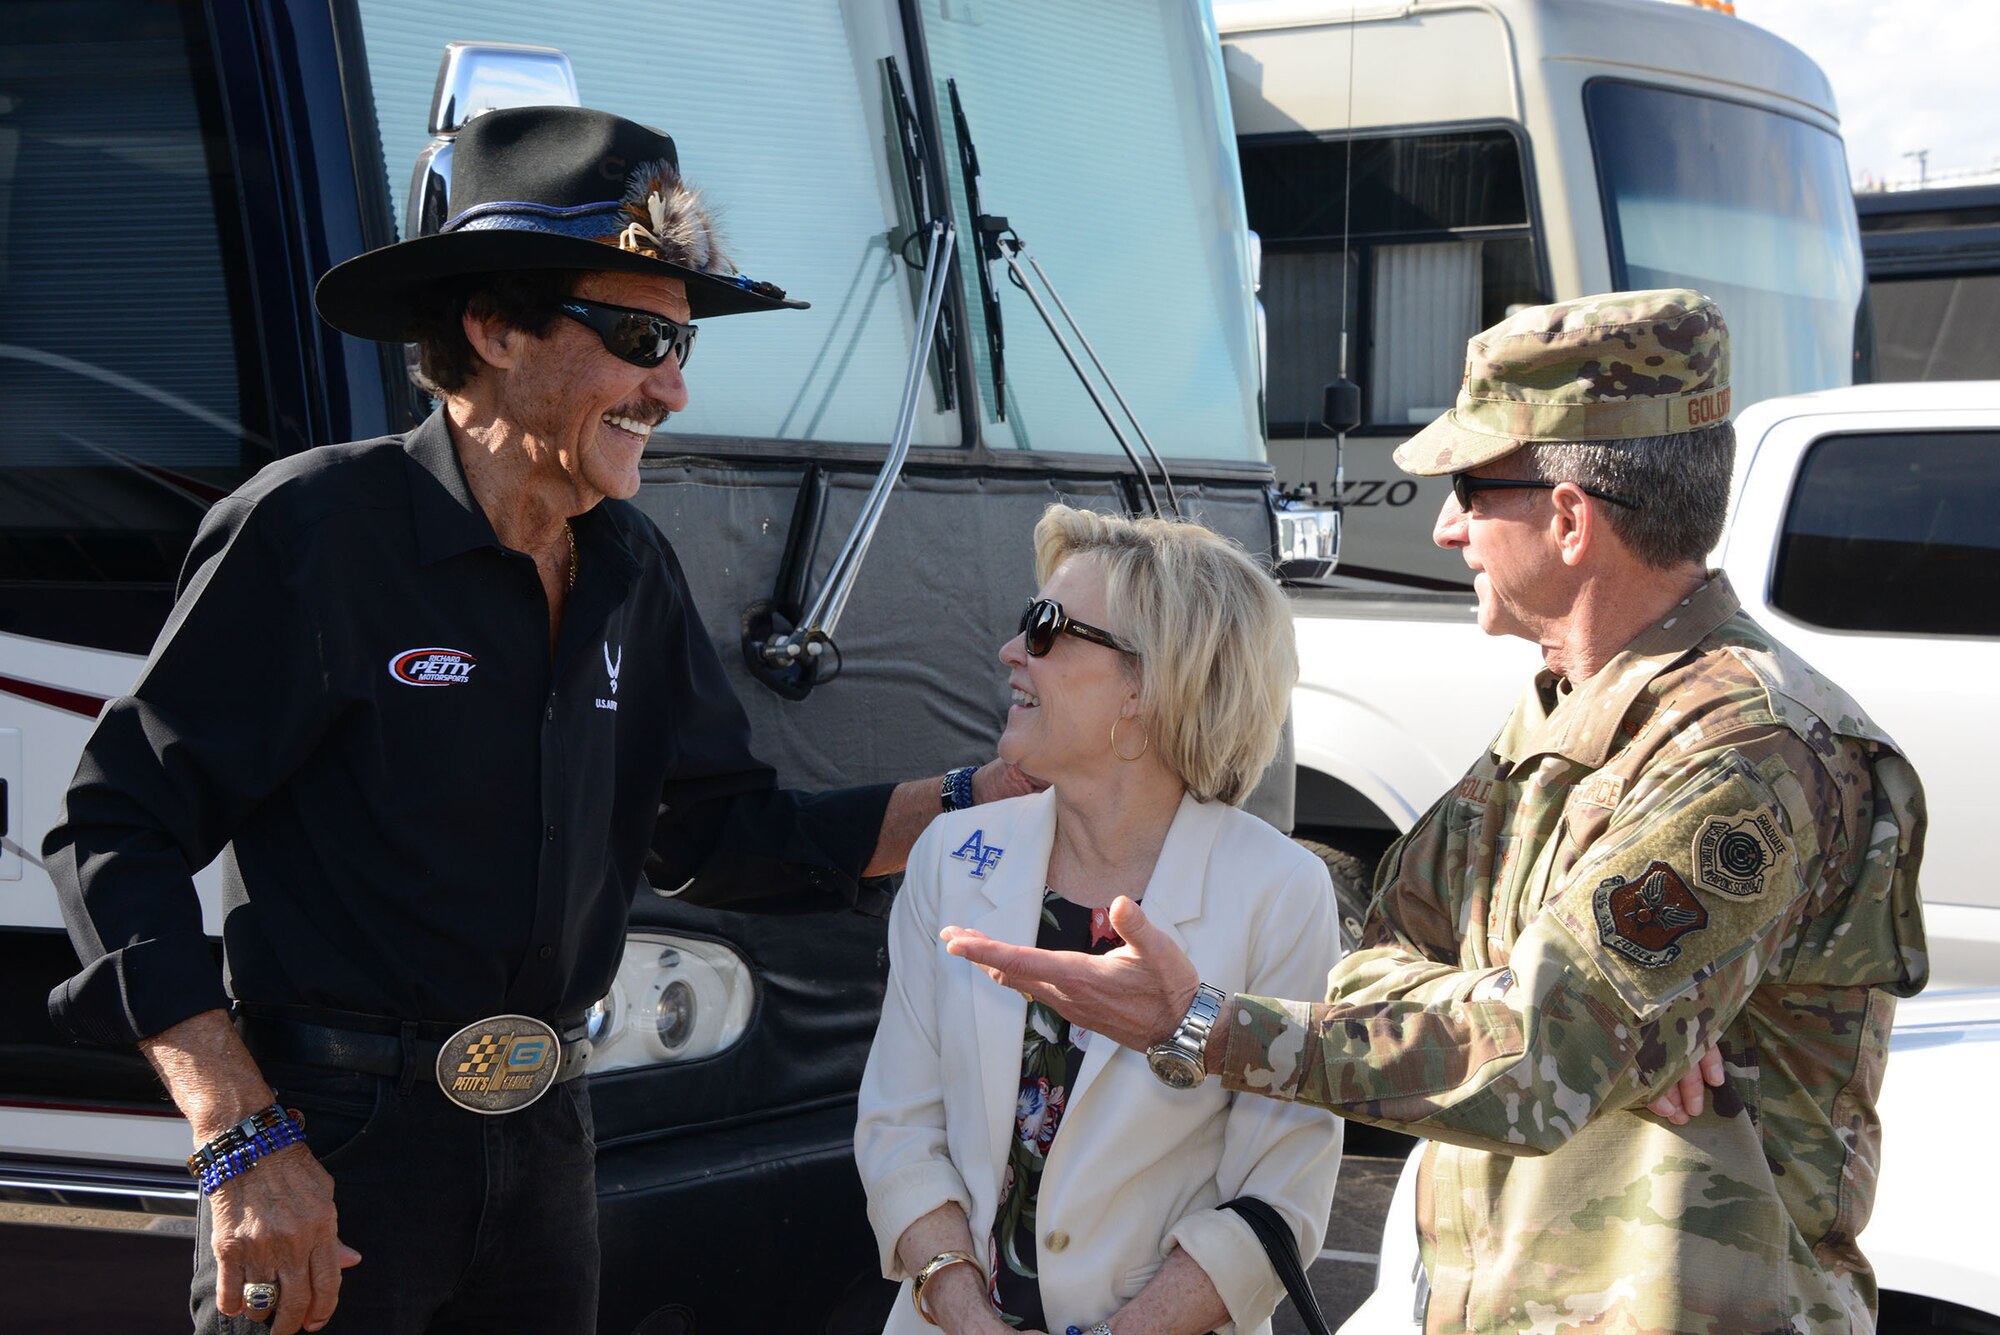 Richard Petty of Richard Petty Motorsports meets with Gen. David L. Goldfein, Air Force chief of staff and his wife Daw Goldfein prior to the race